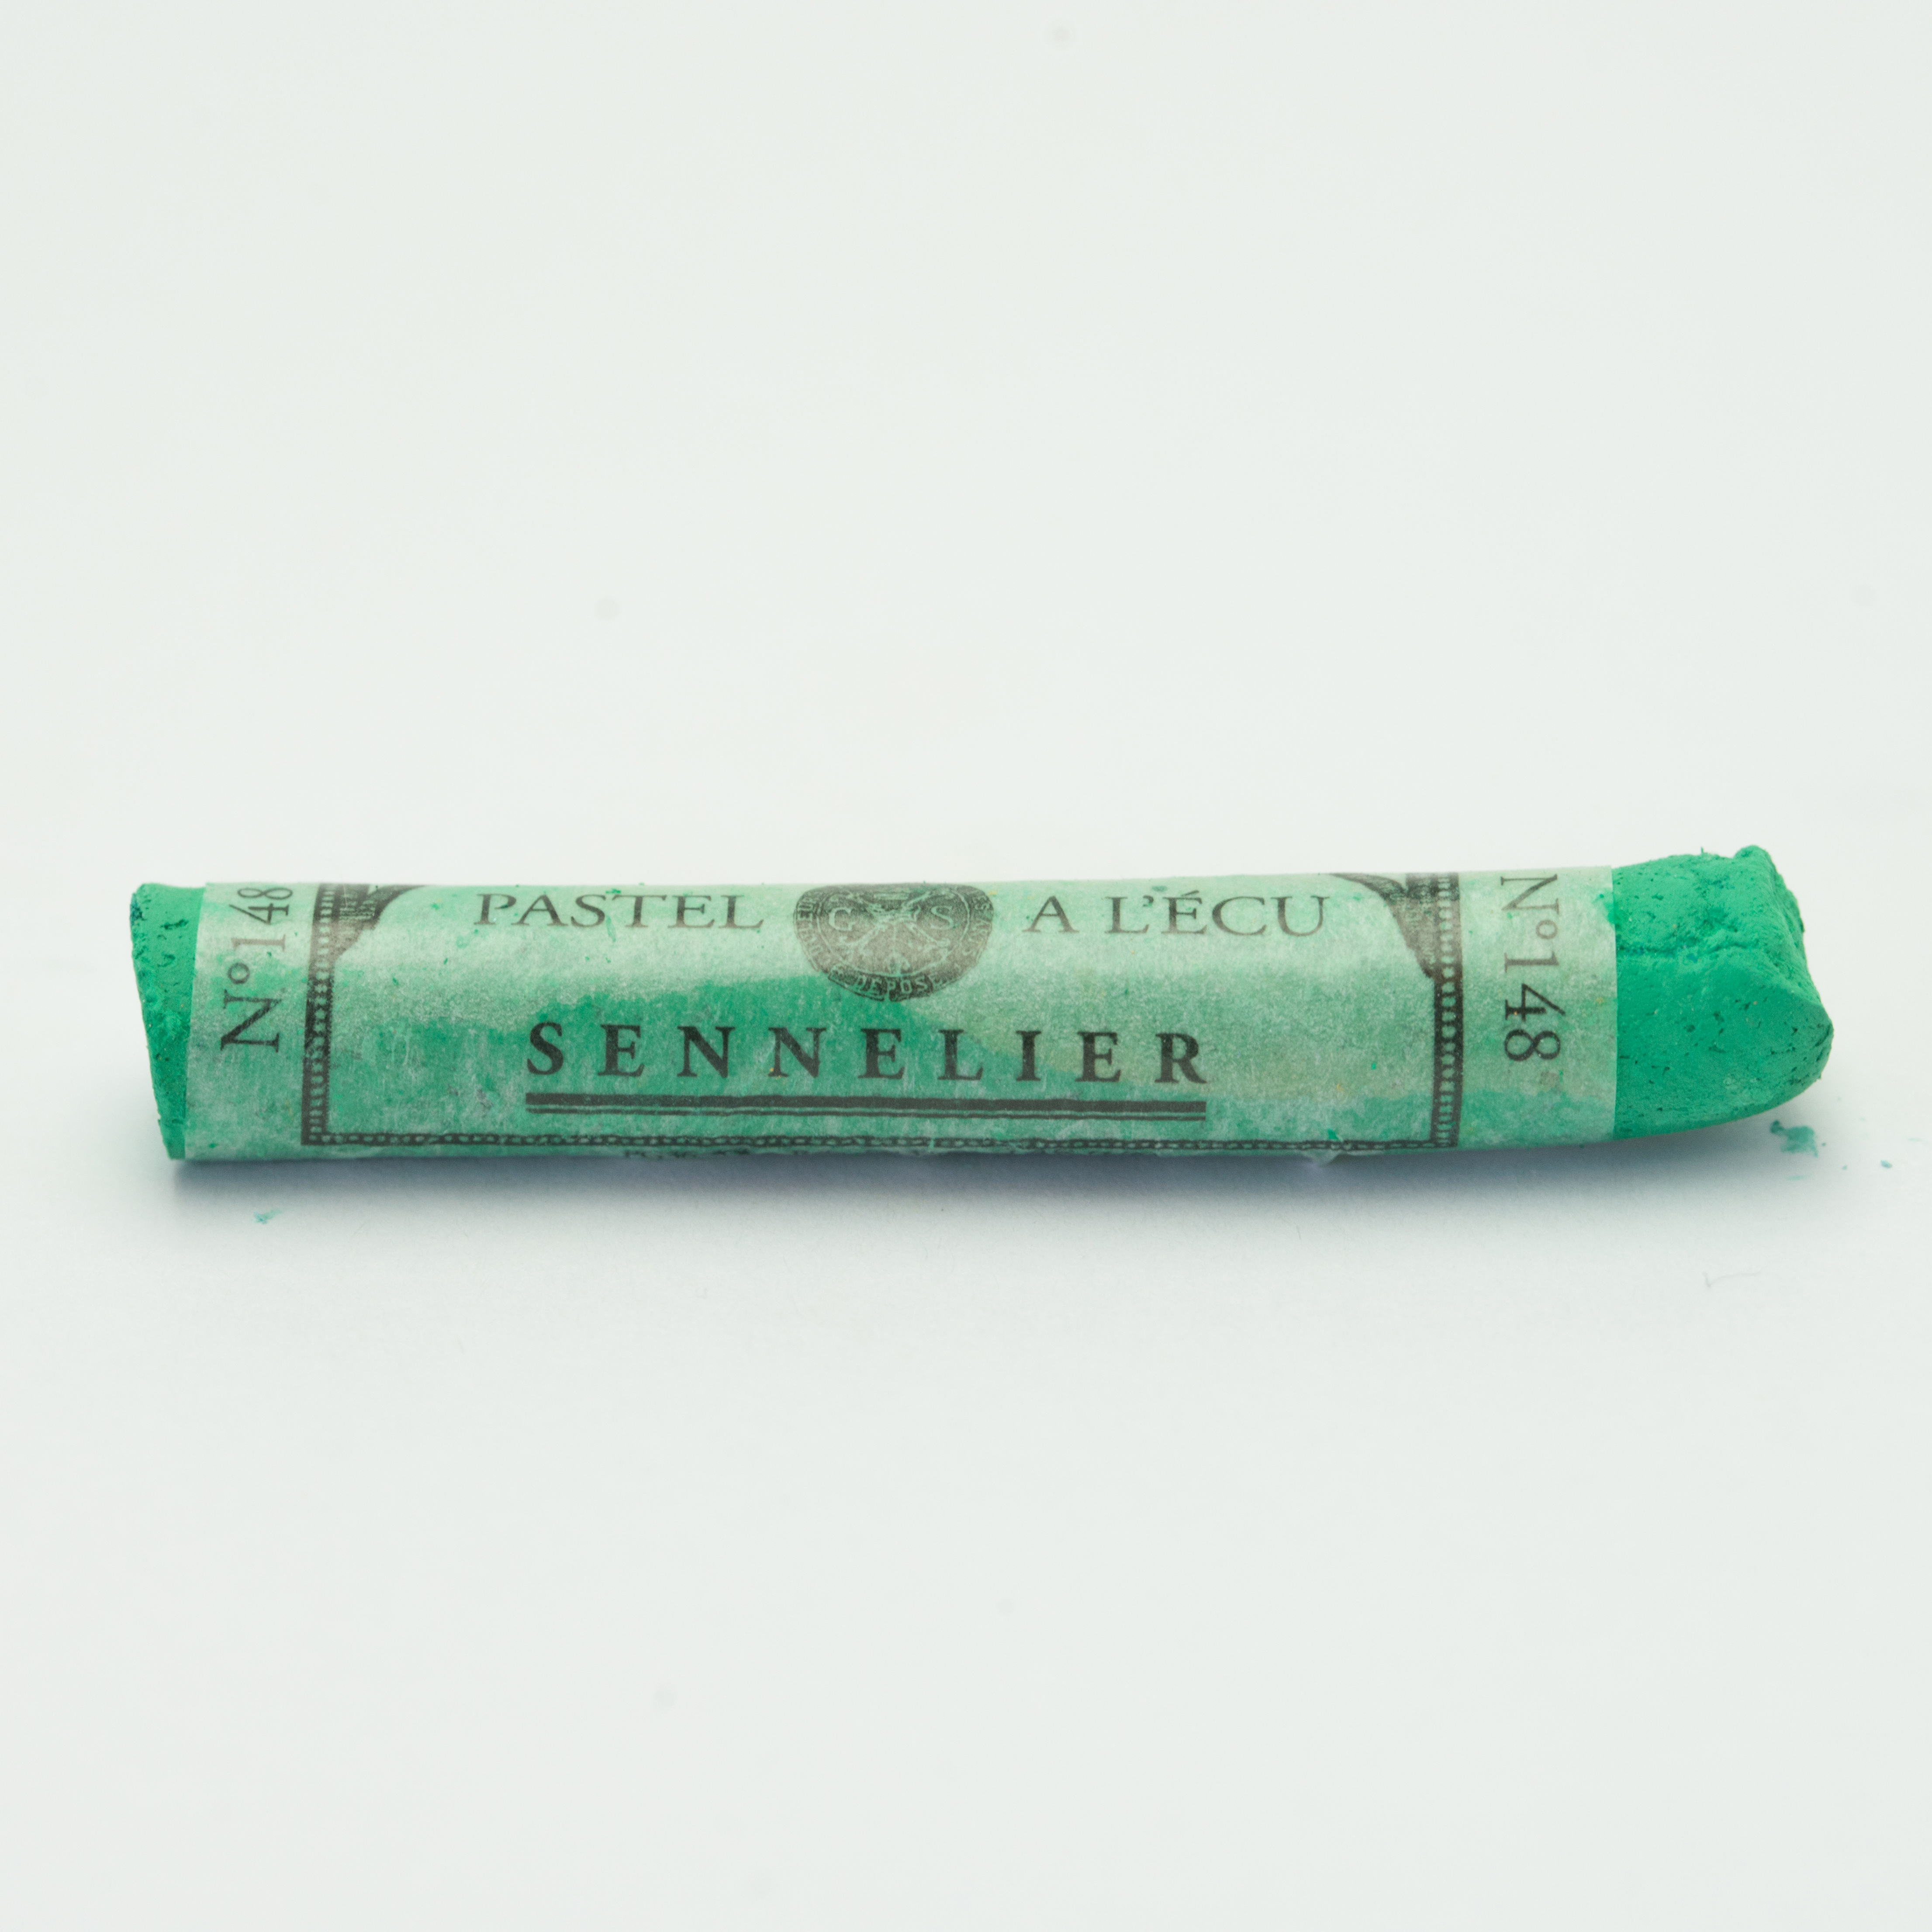 Sennelier Extra Soft Pastels - Lawn Green 148